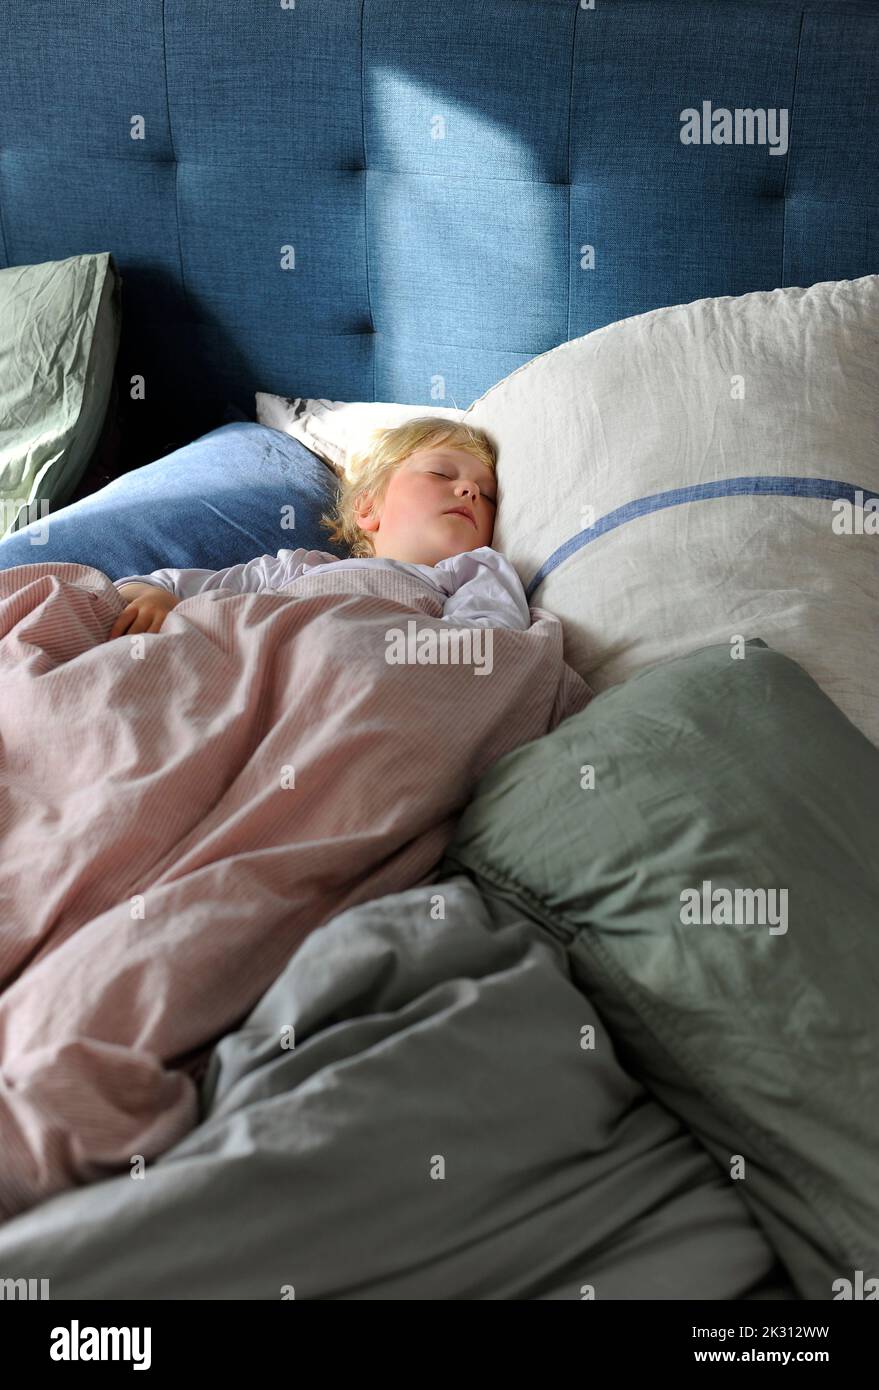 Girl sleeping on bed at home Banque D'Images